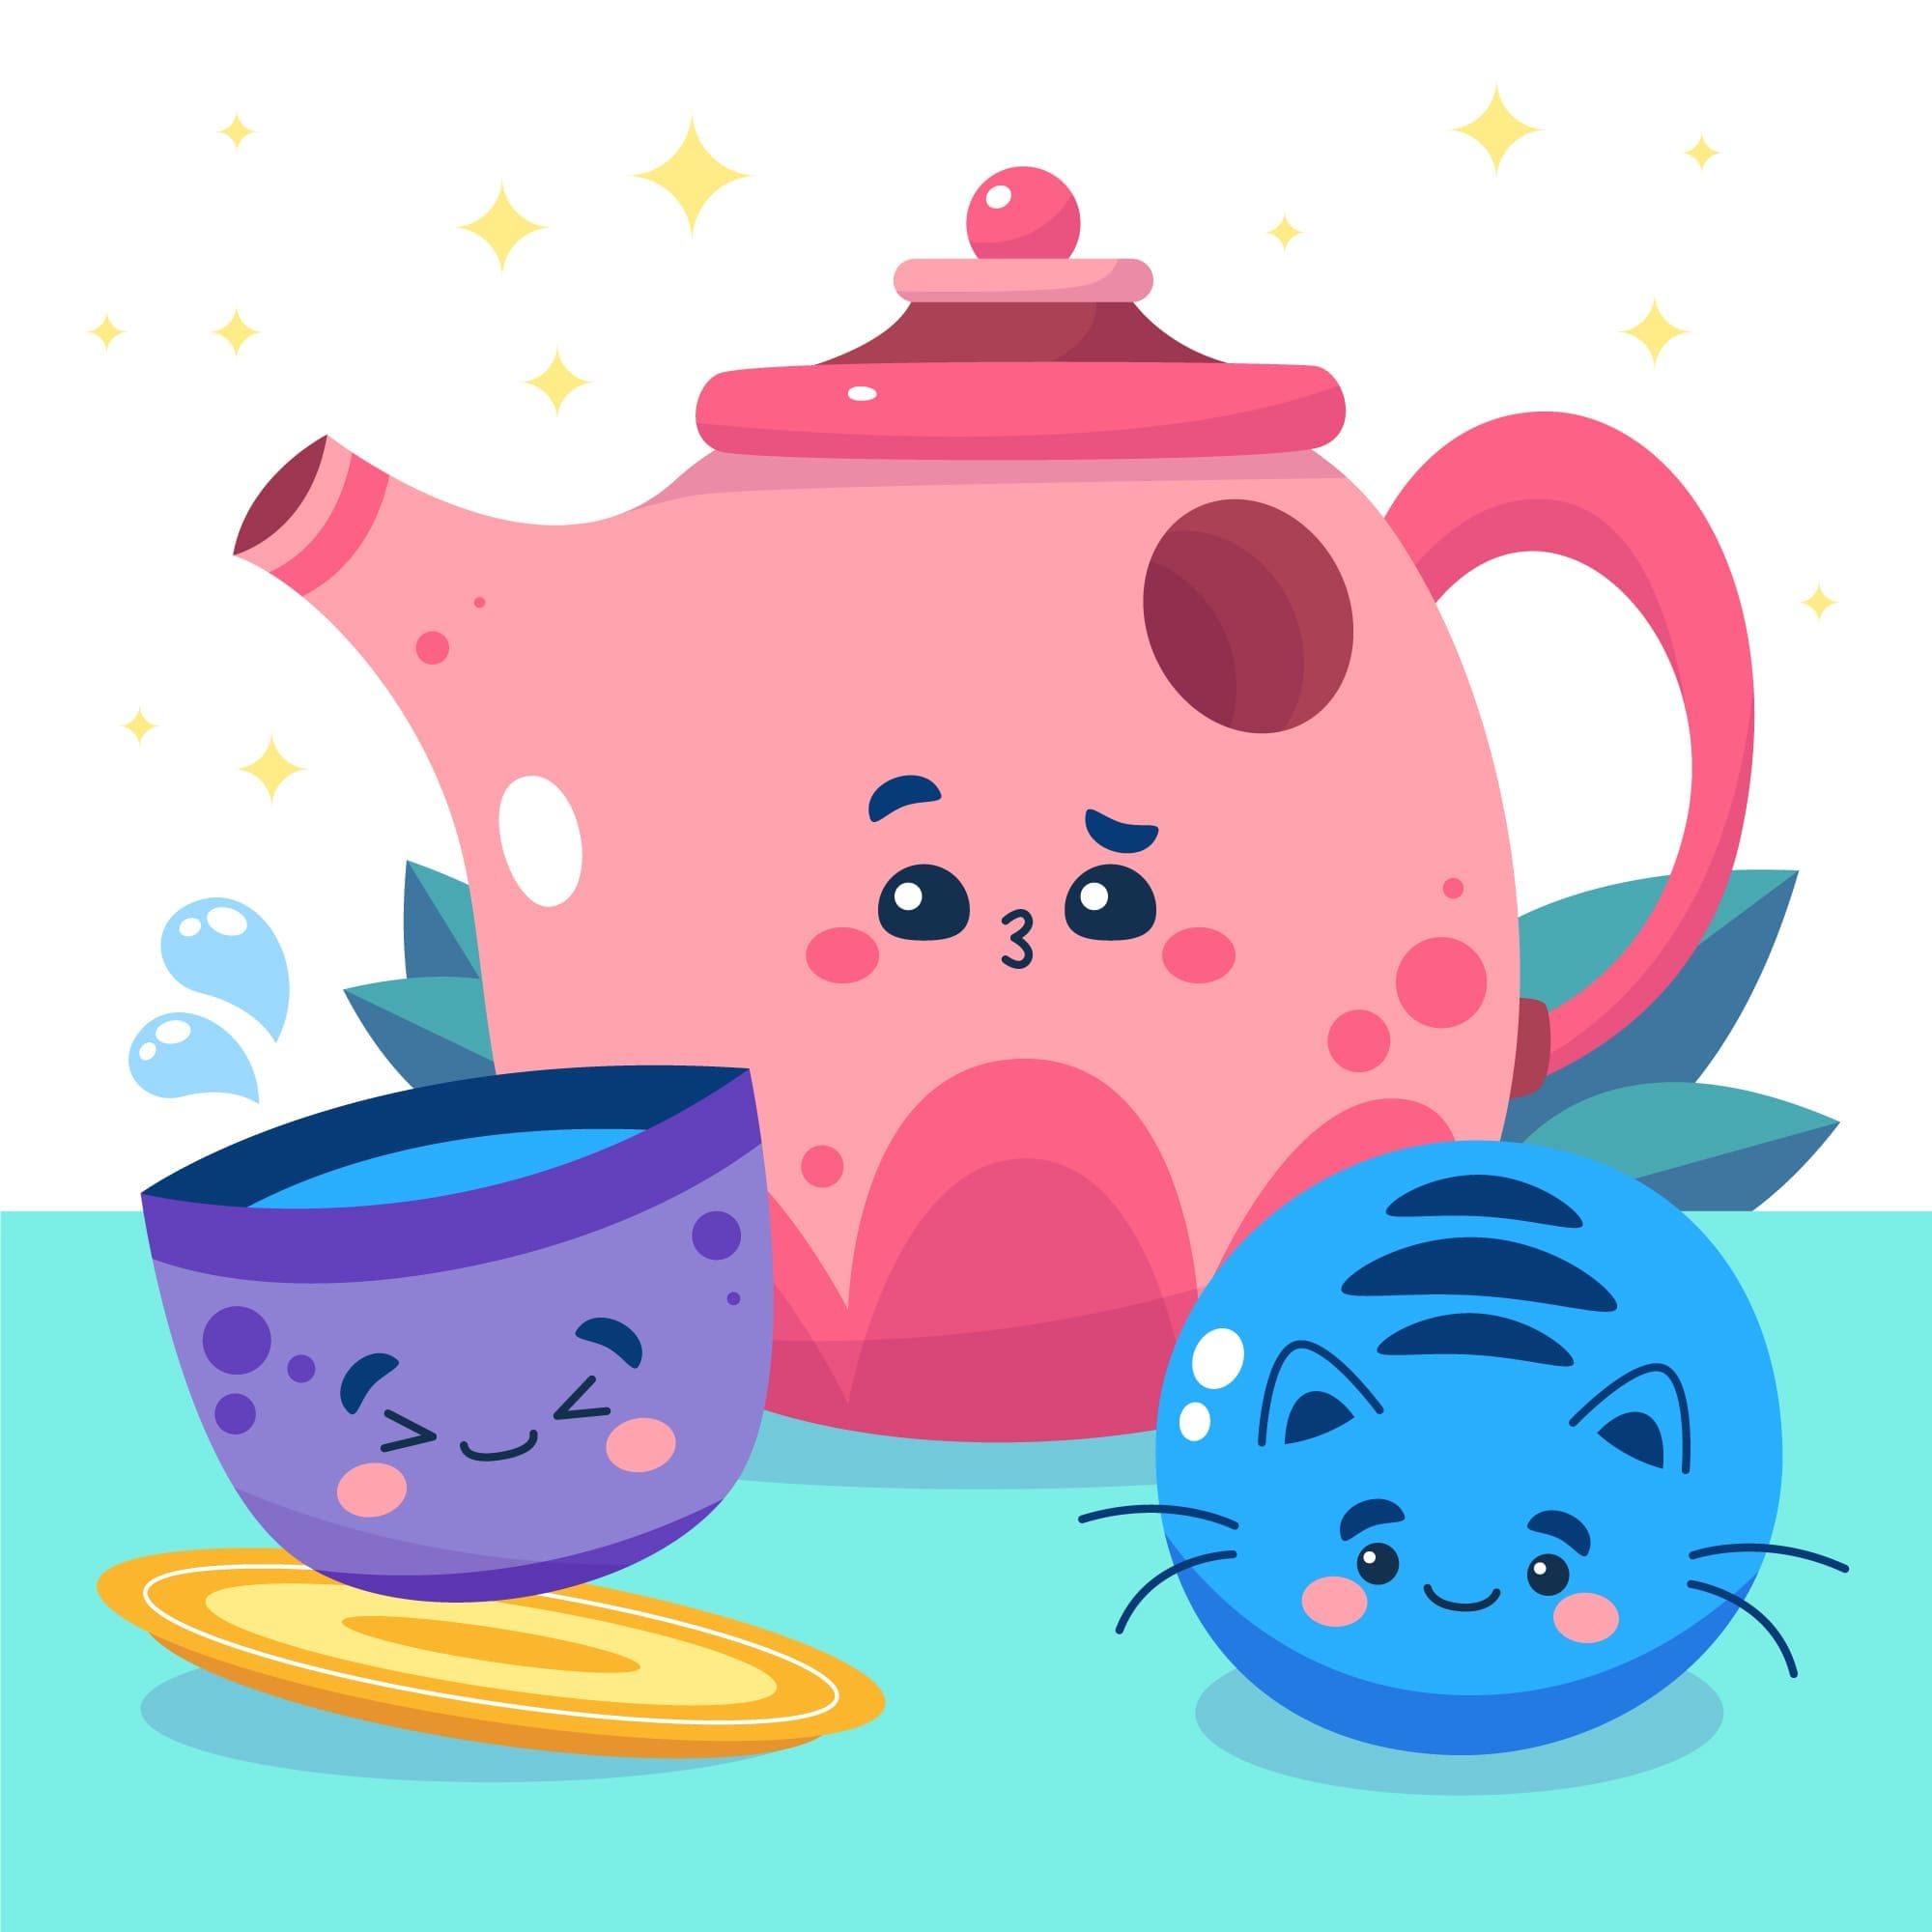 Cartoon graphic of a cheerful teapot pouring tea into a teacup on a tea-themed background.